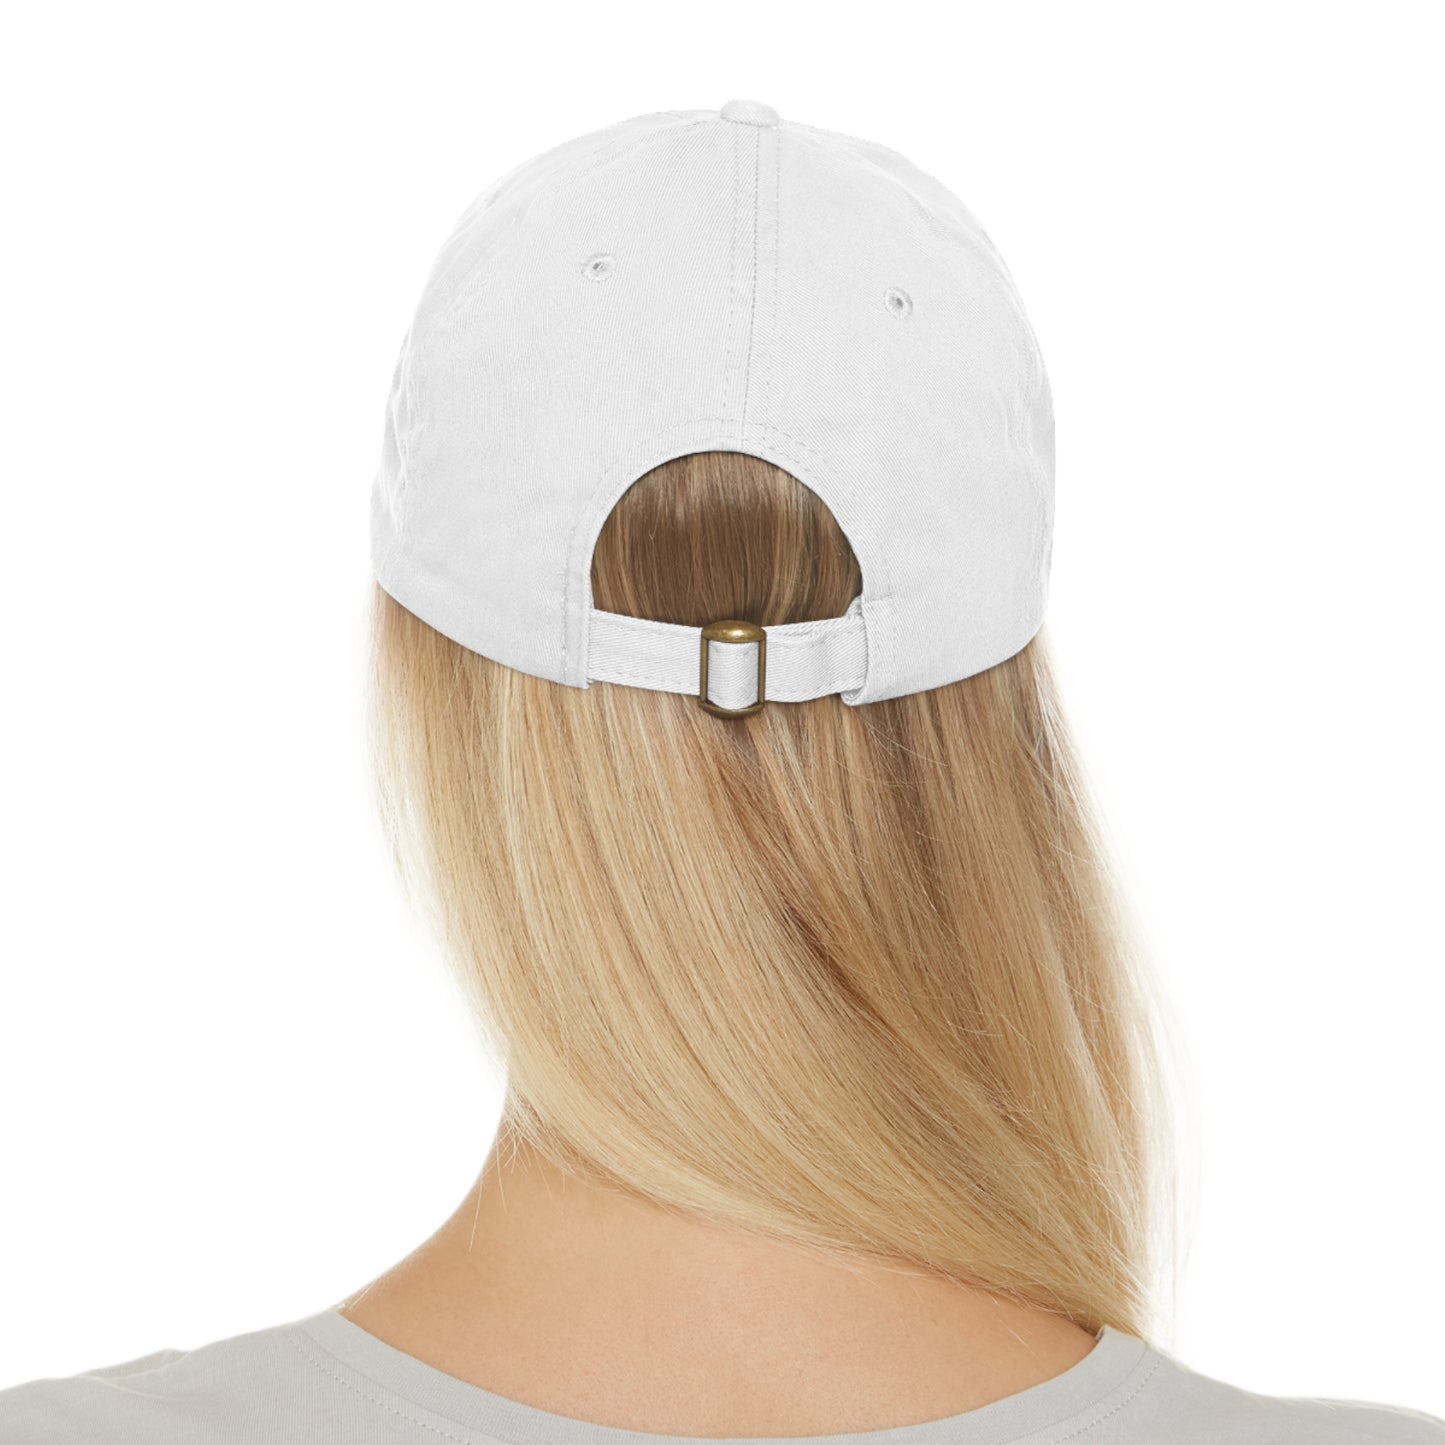 Yoga Gifts | "Love Yoga" Dad Hat with Leather Patch | Hats Petrova Designs